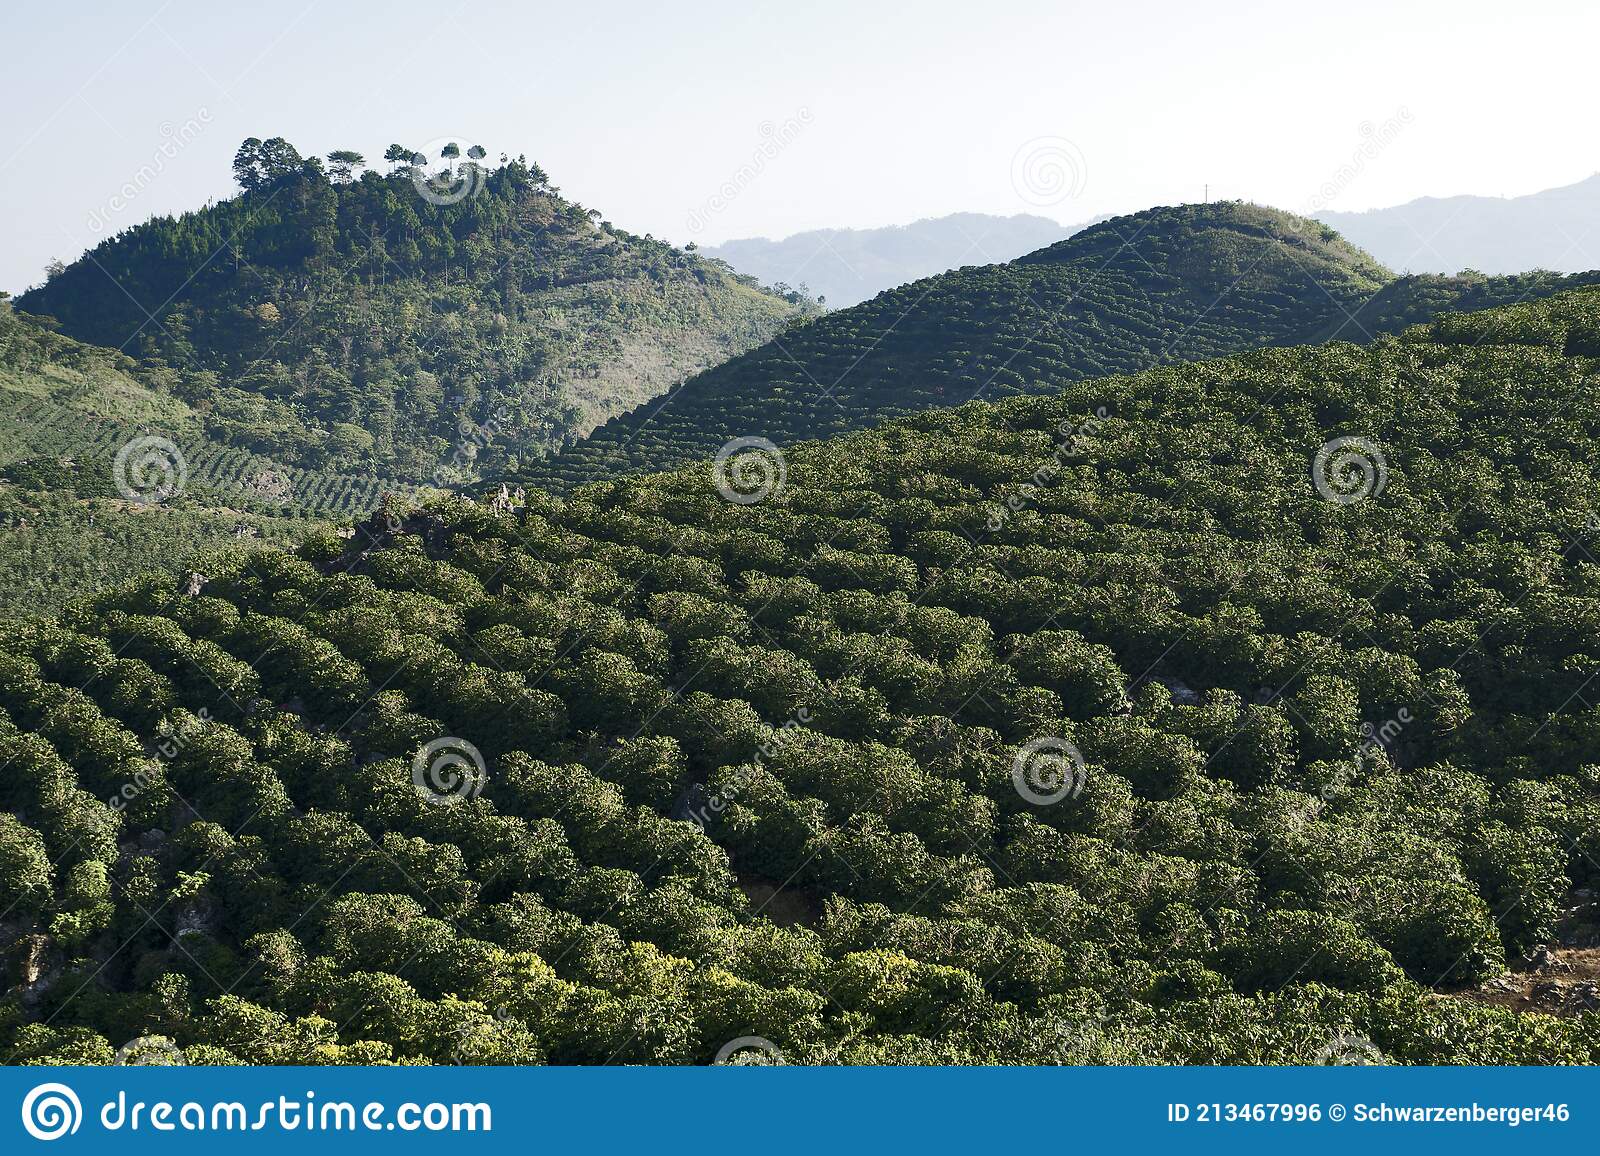 Coffee Plantations in the United States